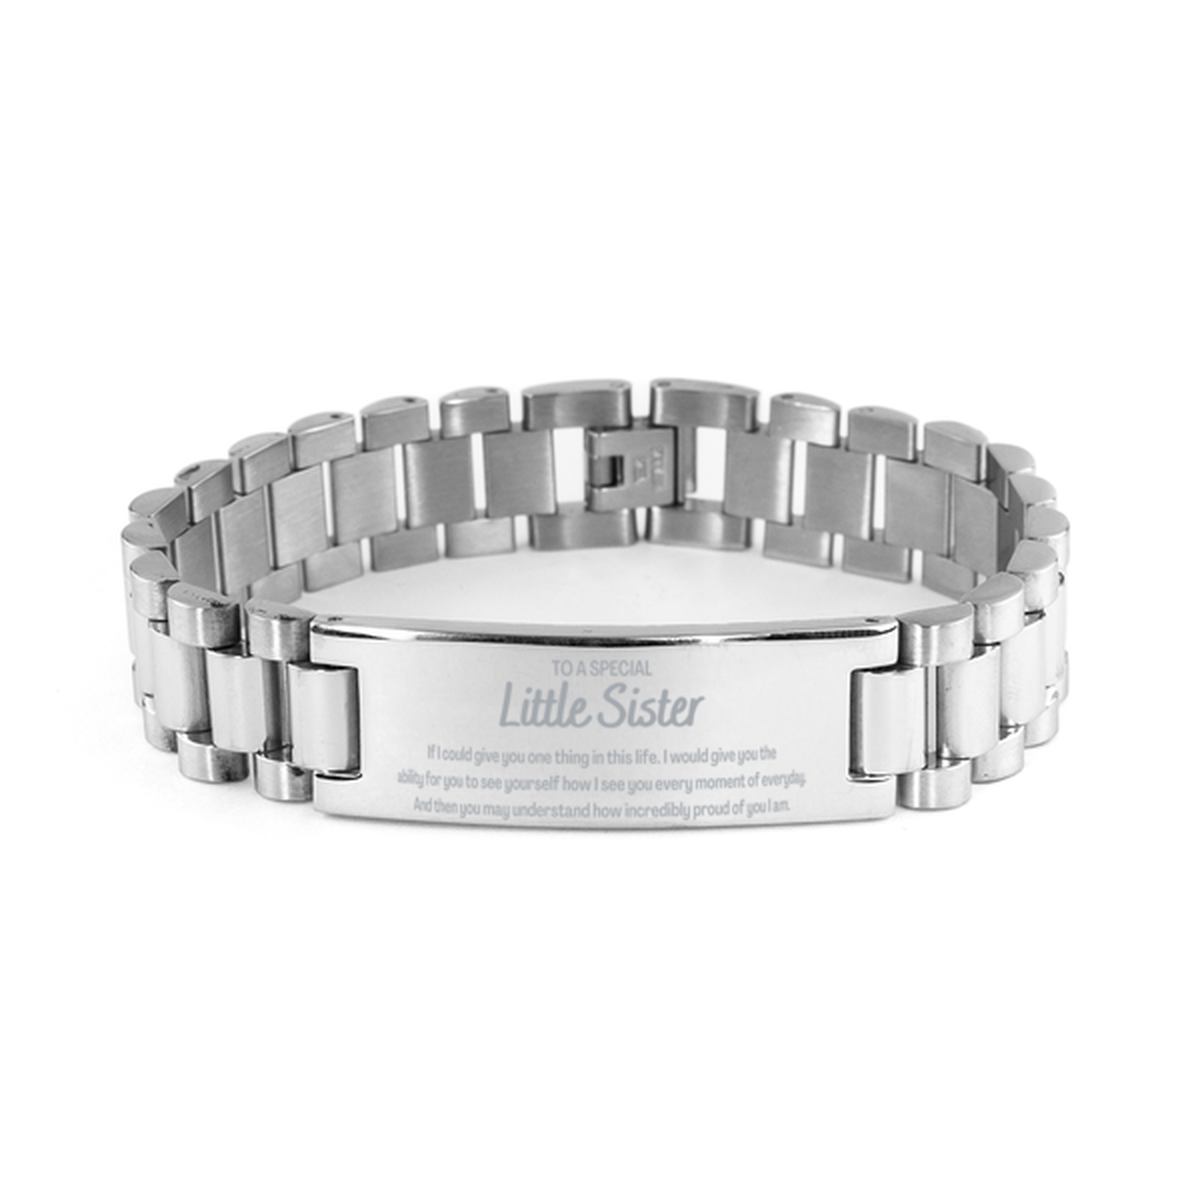 To My Little Sister Ladder Stainless Steel Bracelet, Gifts For Little Sister Engraved, Inspirational Gifts for Christmas Birthday, Epic Gifts for Little Sister To A Special Little Sister how incredibly proud of you I am